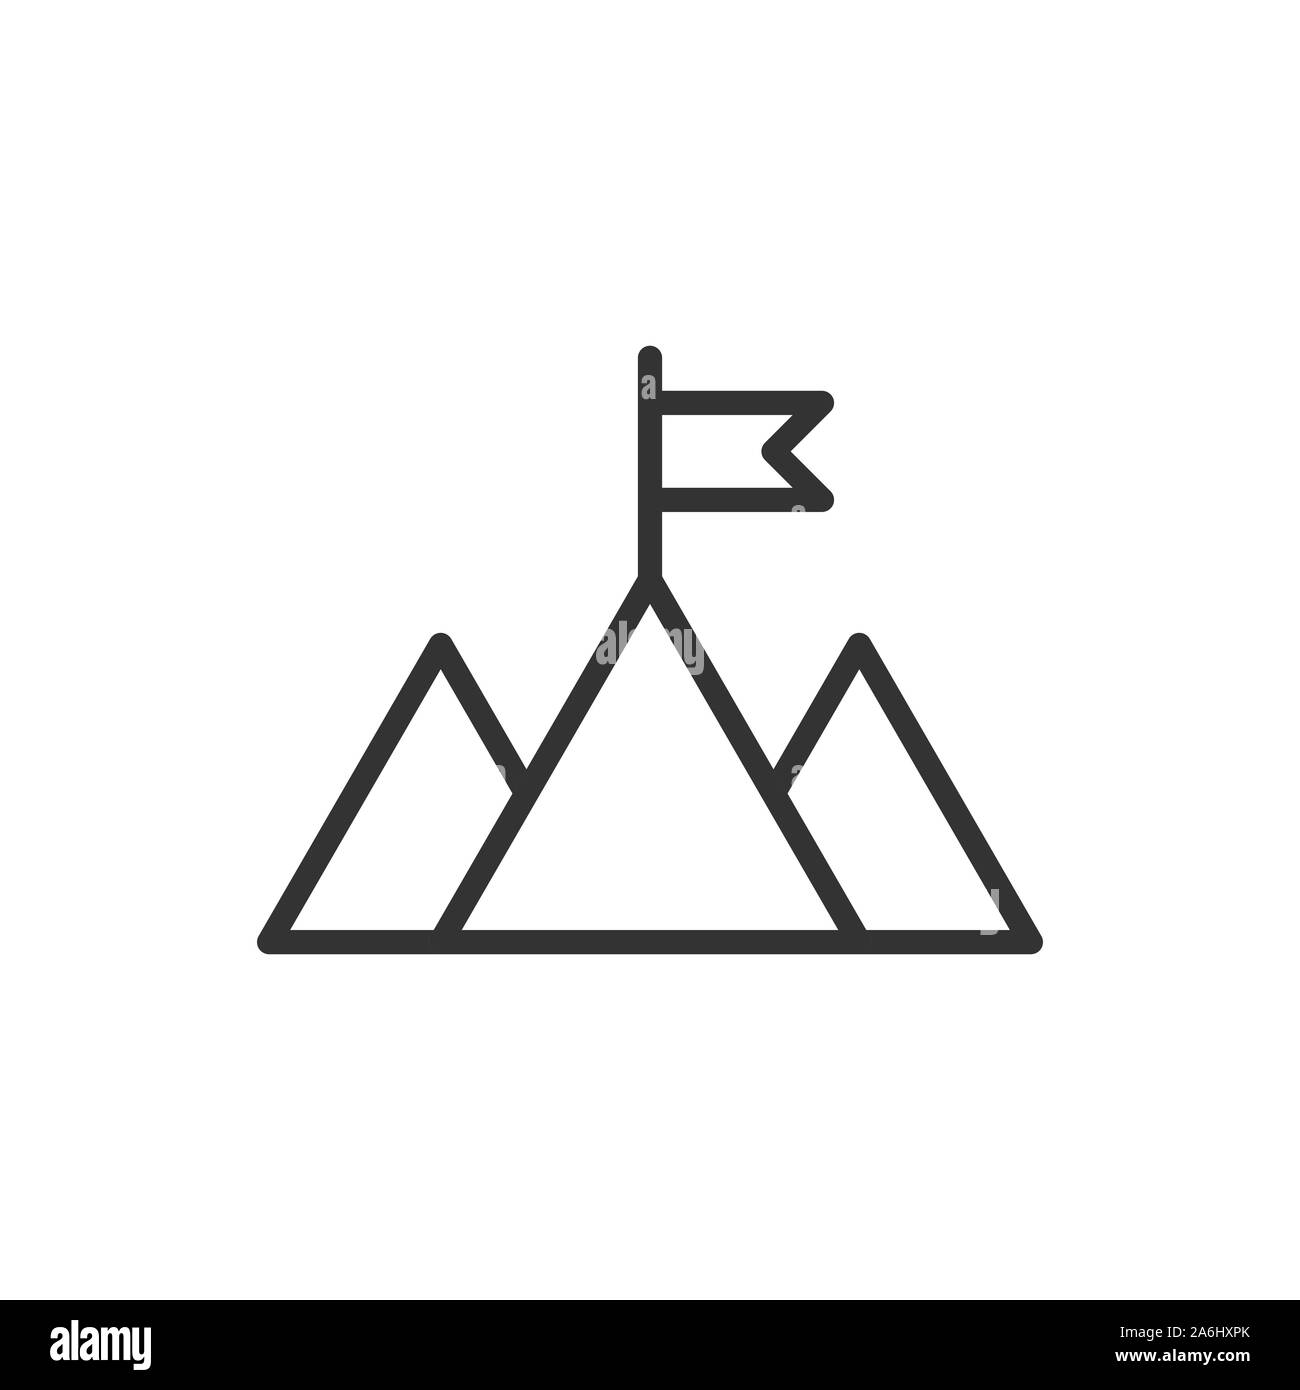 Mission champion icon in flat style. Mountain vector illustration on white isolated background. Leadership business concept. Stock Vector